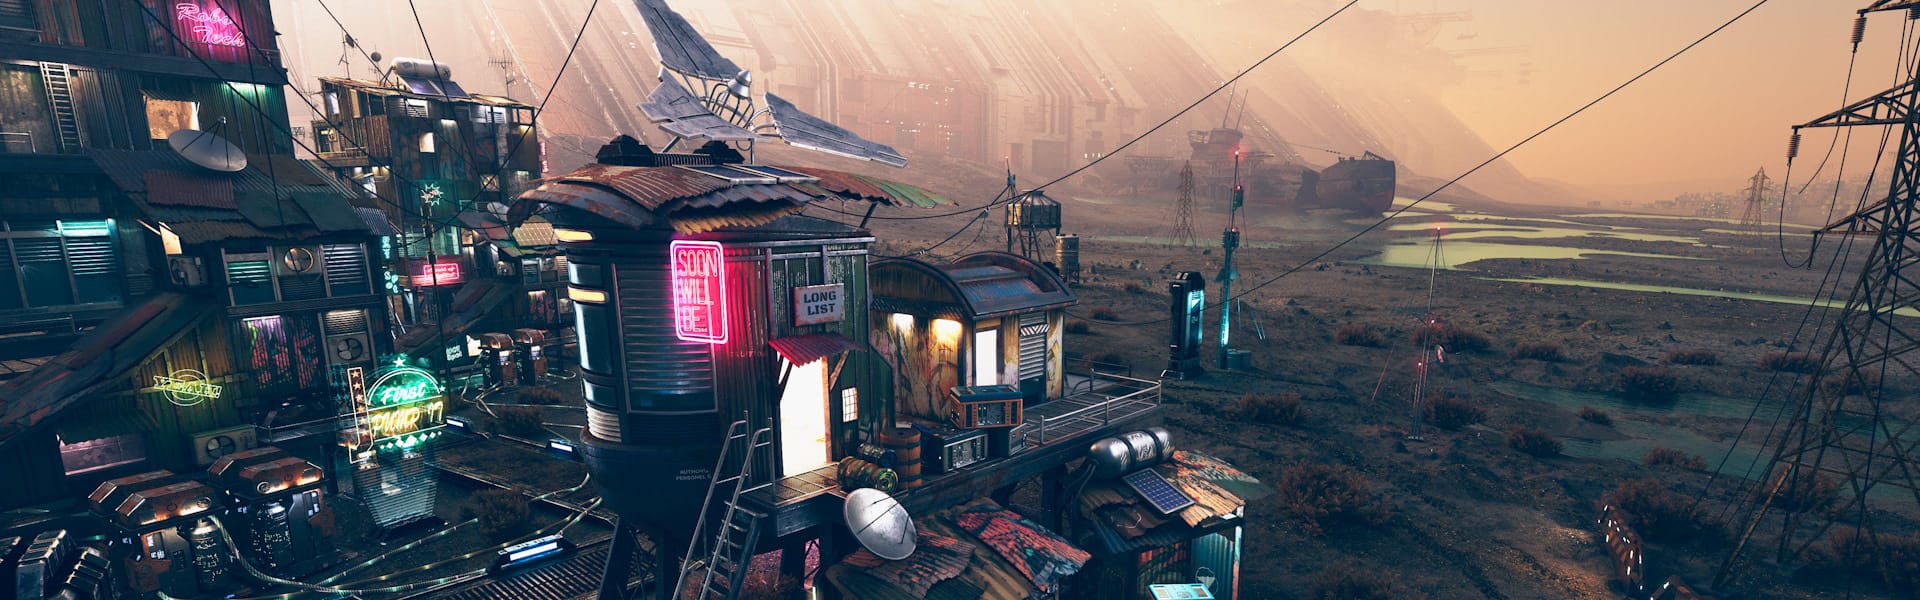 Dystopian city with neon signs and pylons